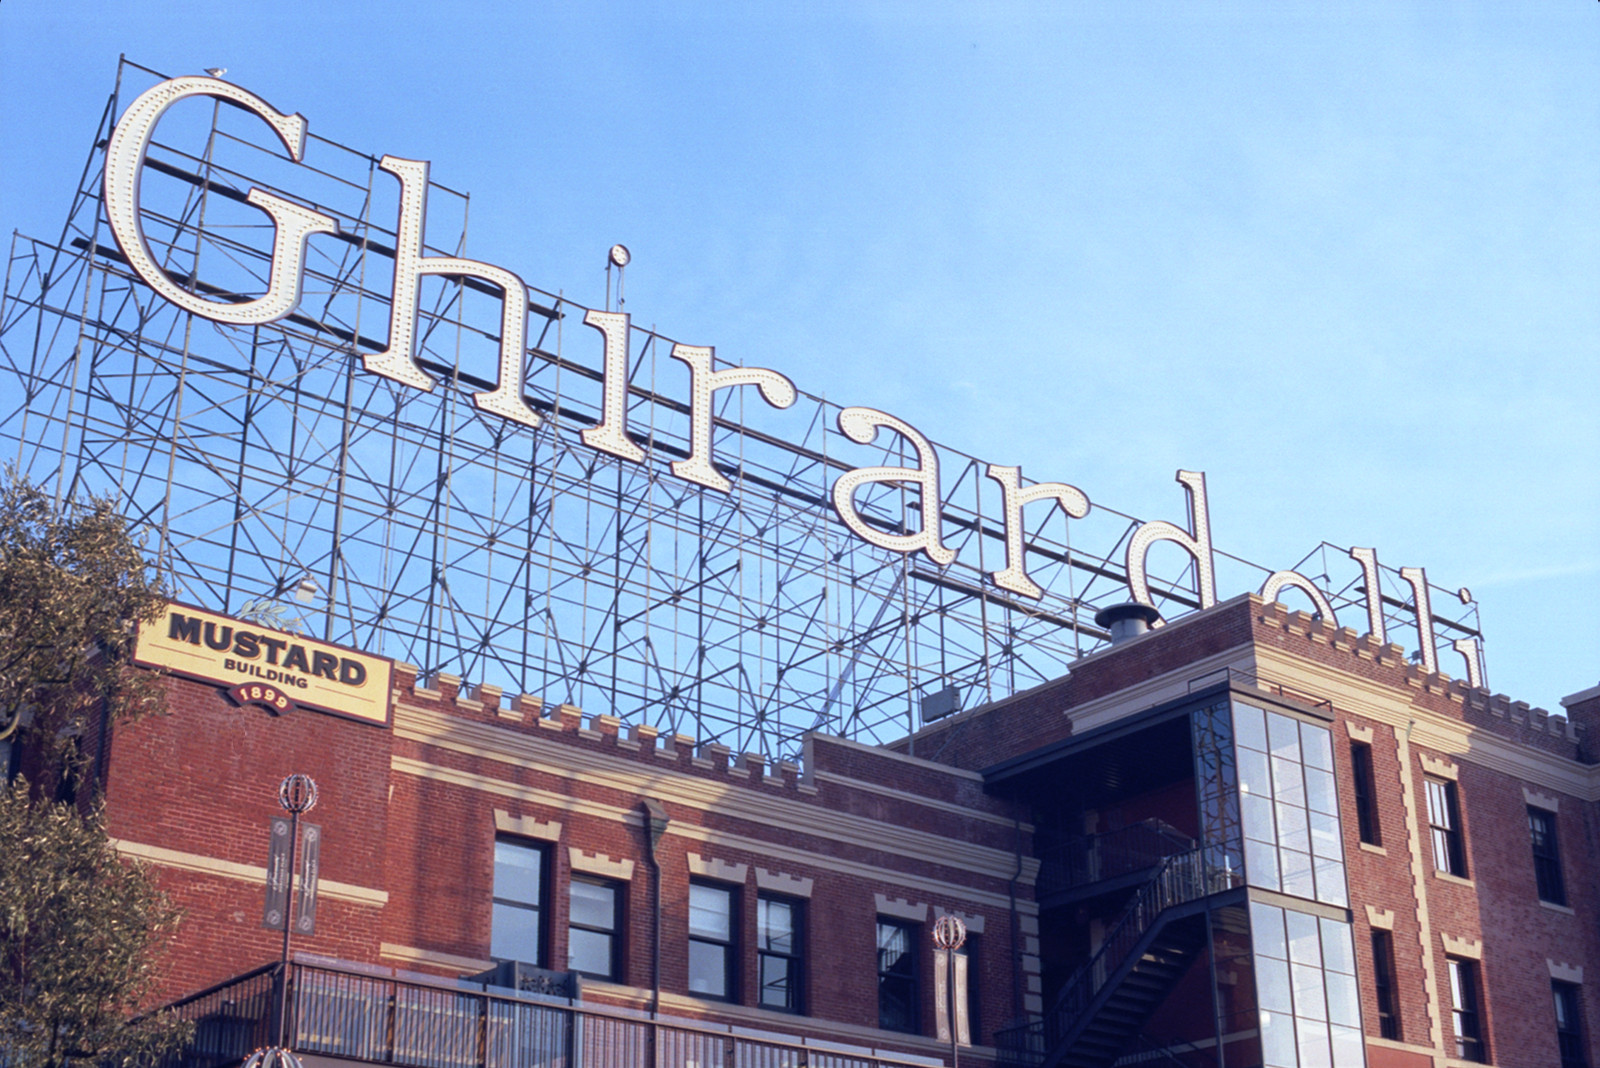 The huge sign, composed of more lightbulbs than you can count, stretches the full length of the Mustard and Cocoa Buildings in Ghirardelli Square. The camera was pointed up from the main plaza of Ghirardelli, near the Chocolate Shop. 